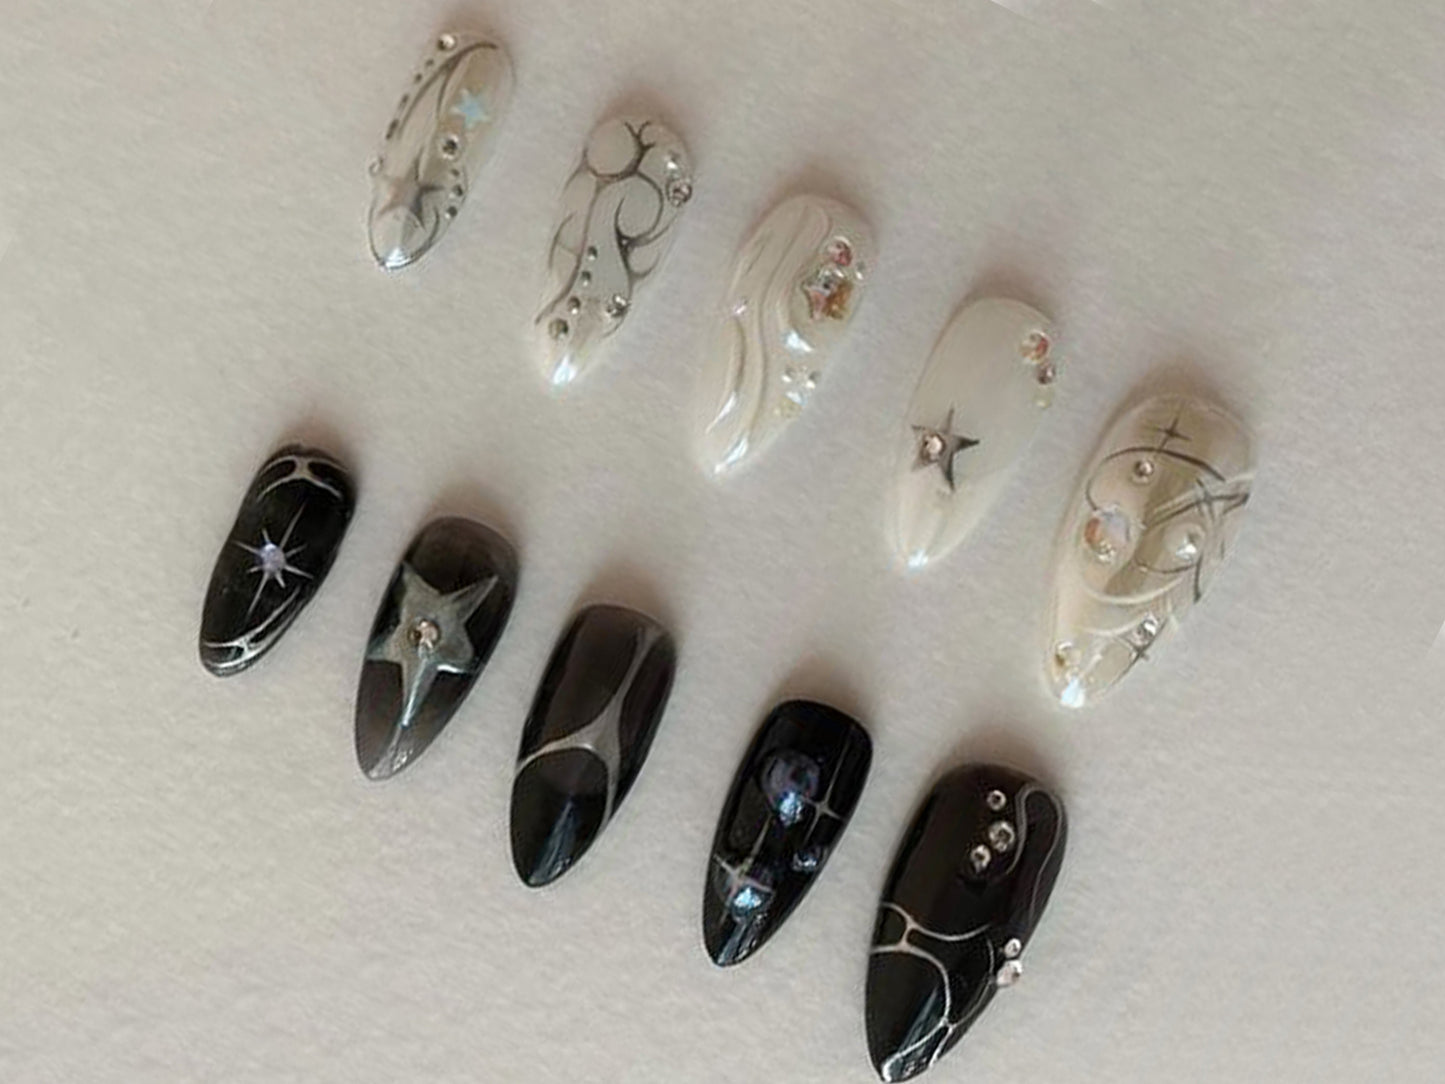 Black & White Press On Nails | Gothic Gel Nail Art | Gem Charms and Silver Filigree Nails | Luxurious Gothic Style Nails | J16